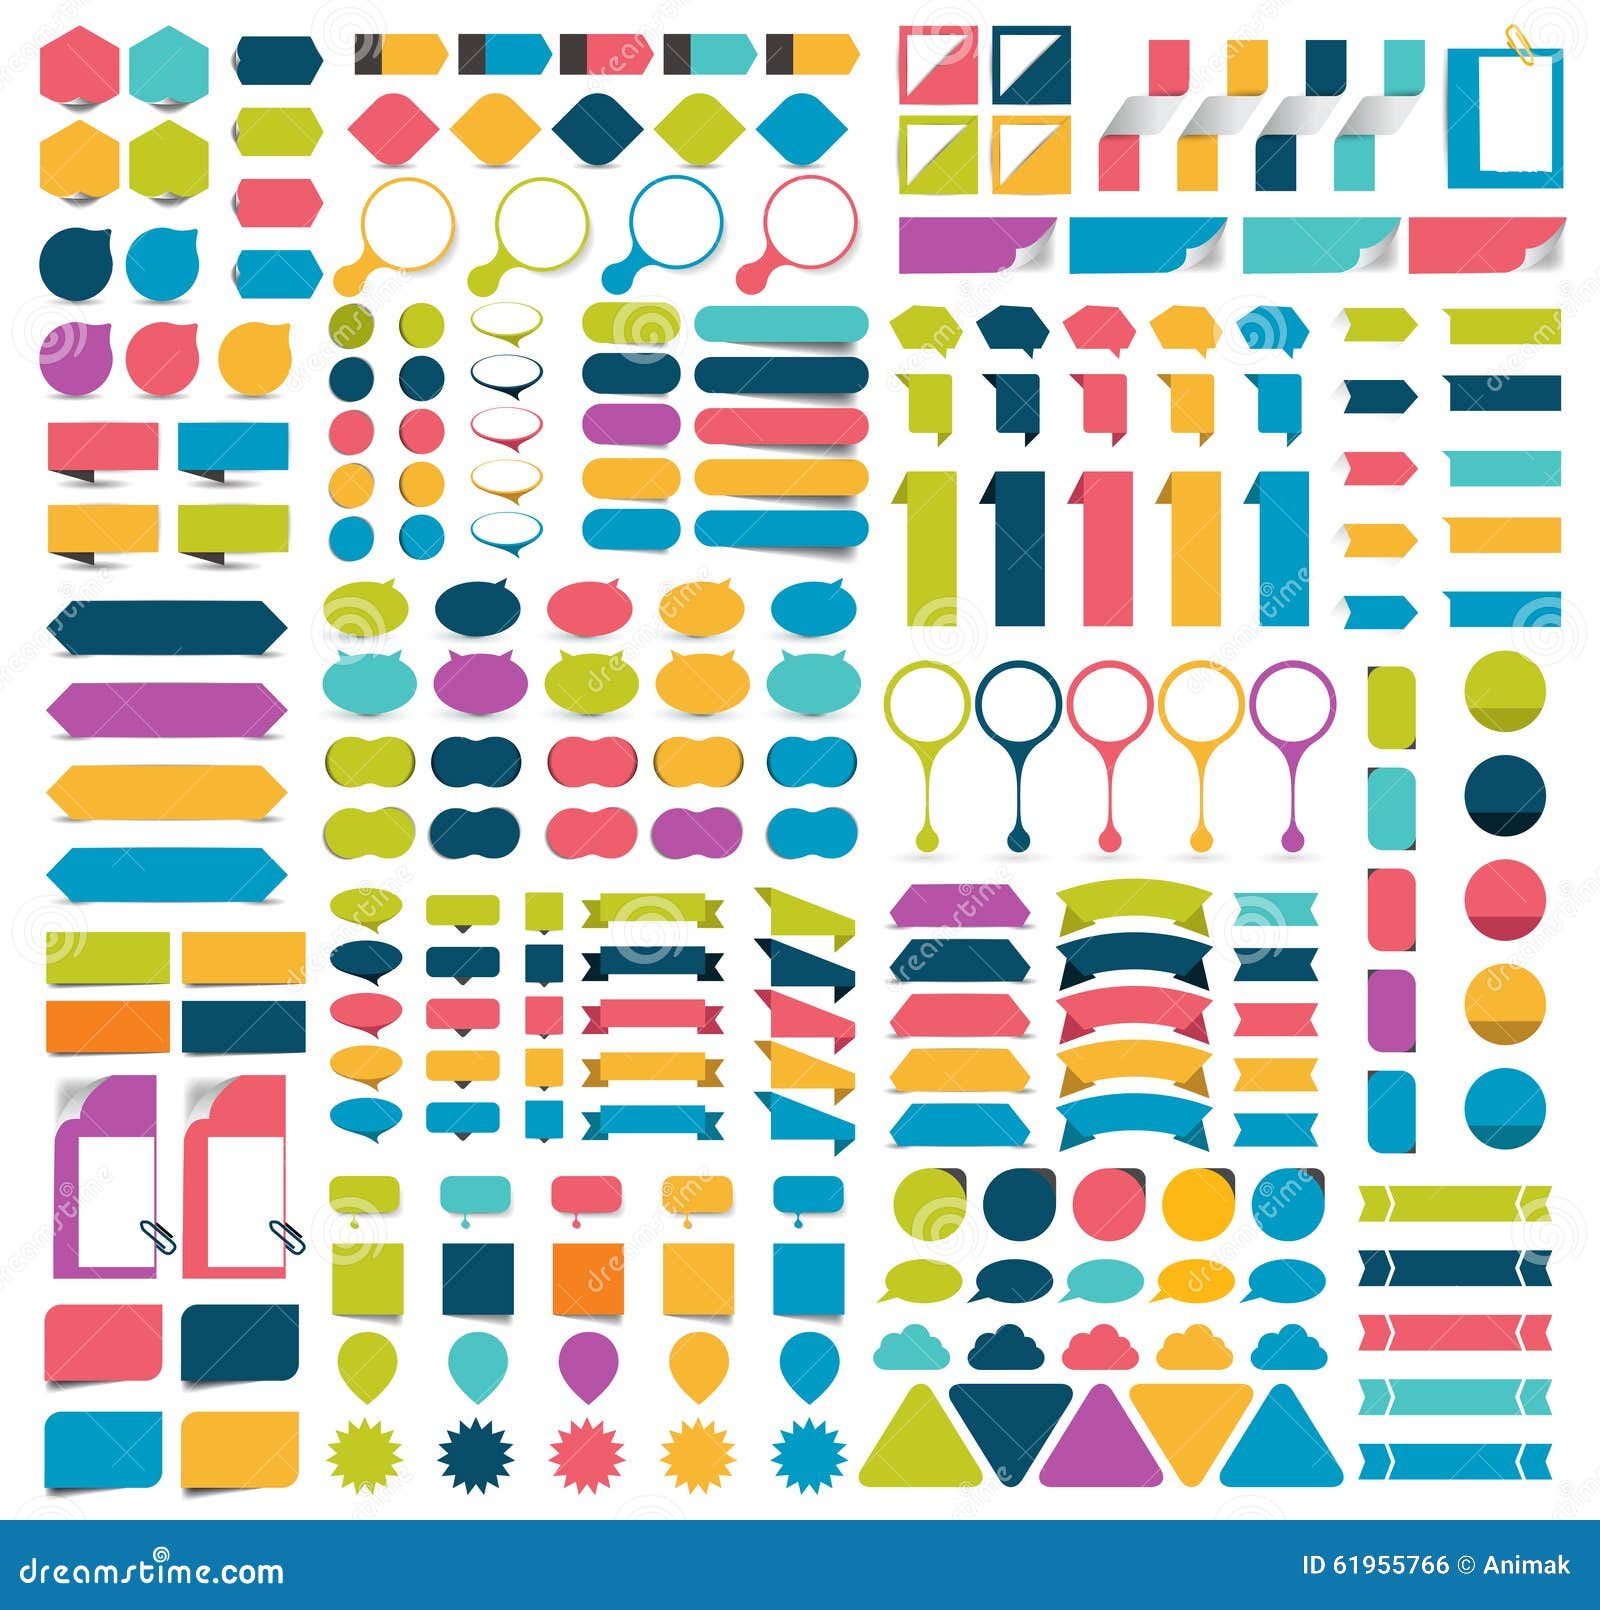 mega collections of infographics flat  s, buttons, stickers, note papers, pointers.